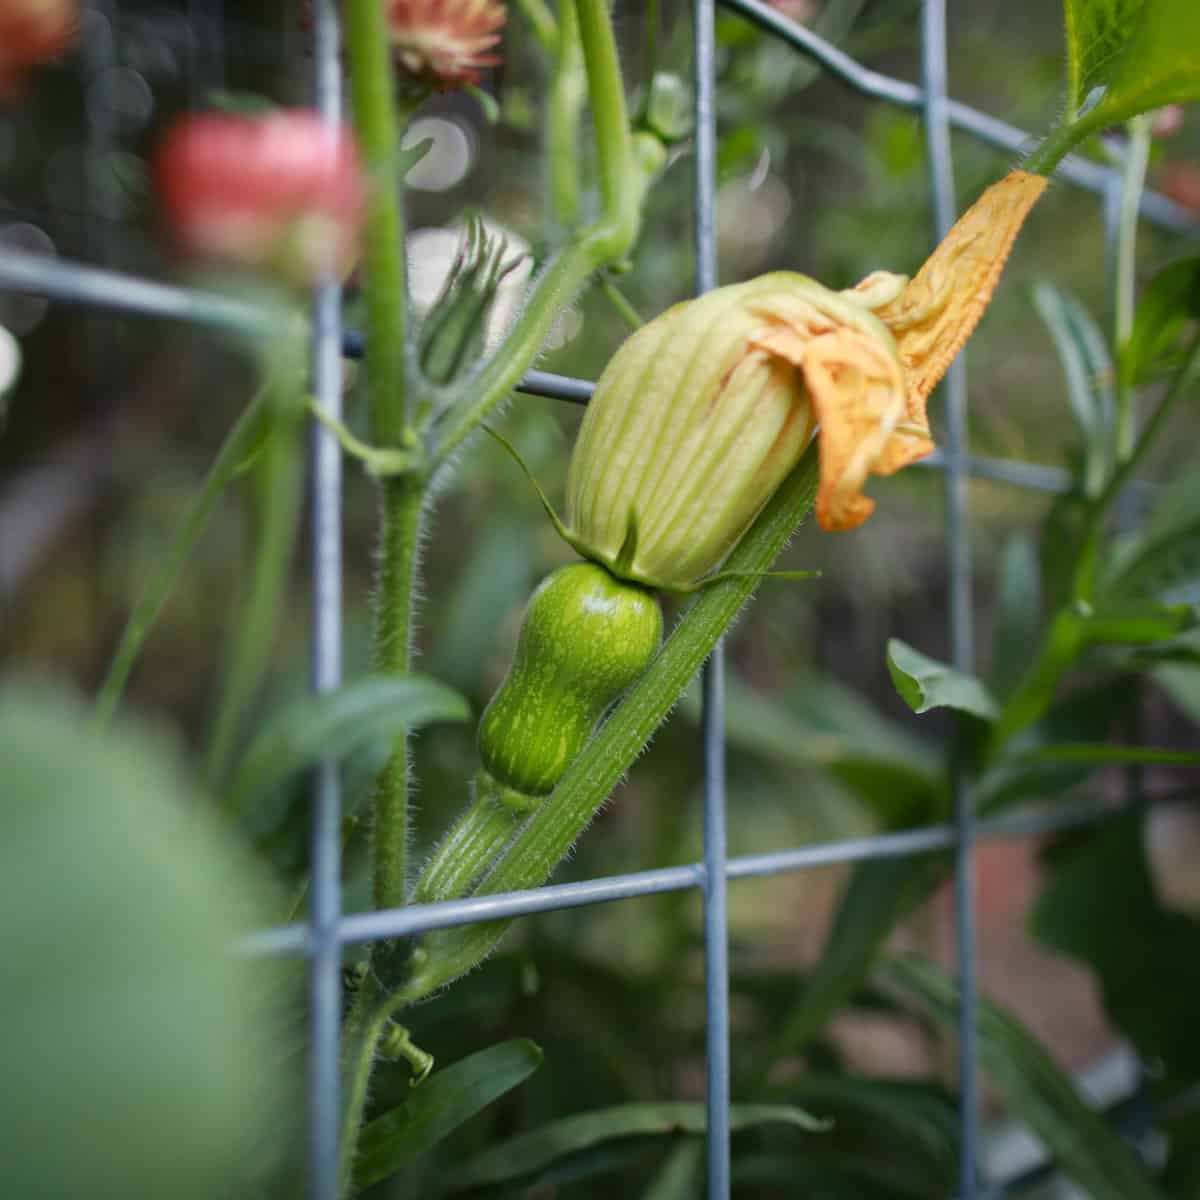 A baby butternut squash on the vine, growing up a trellis.